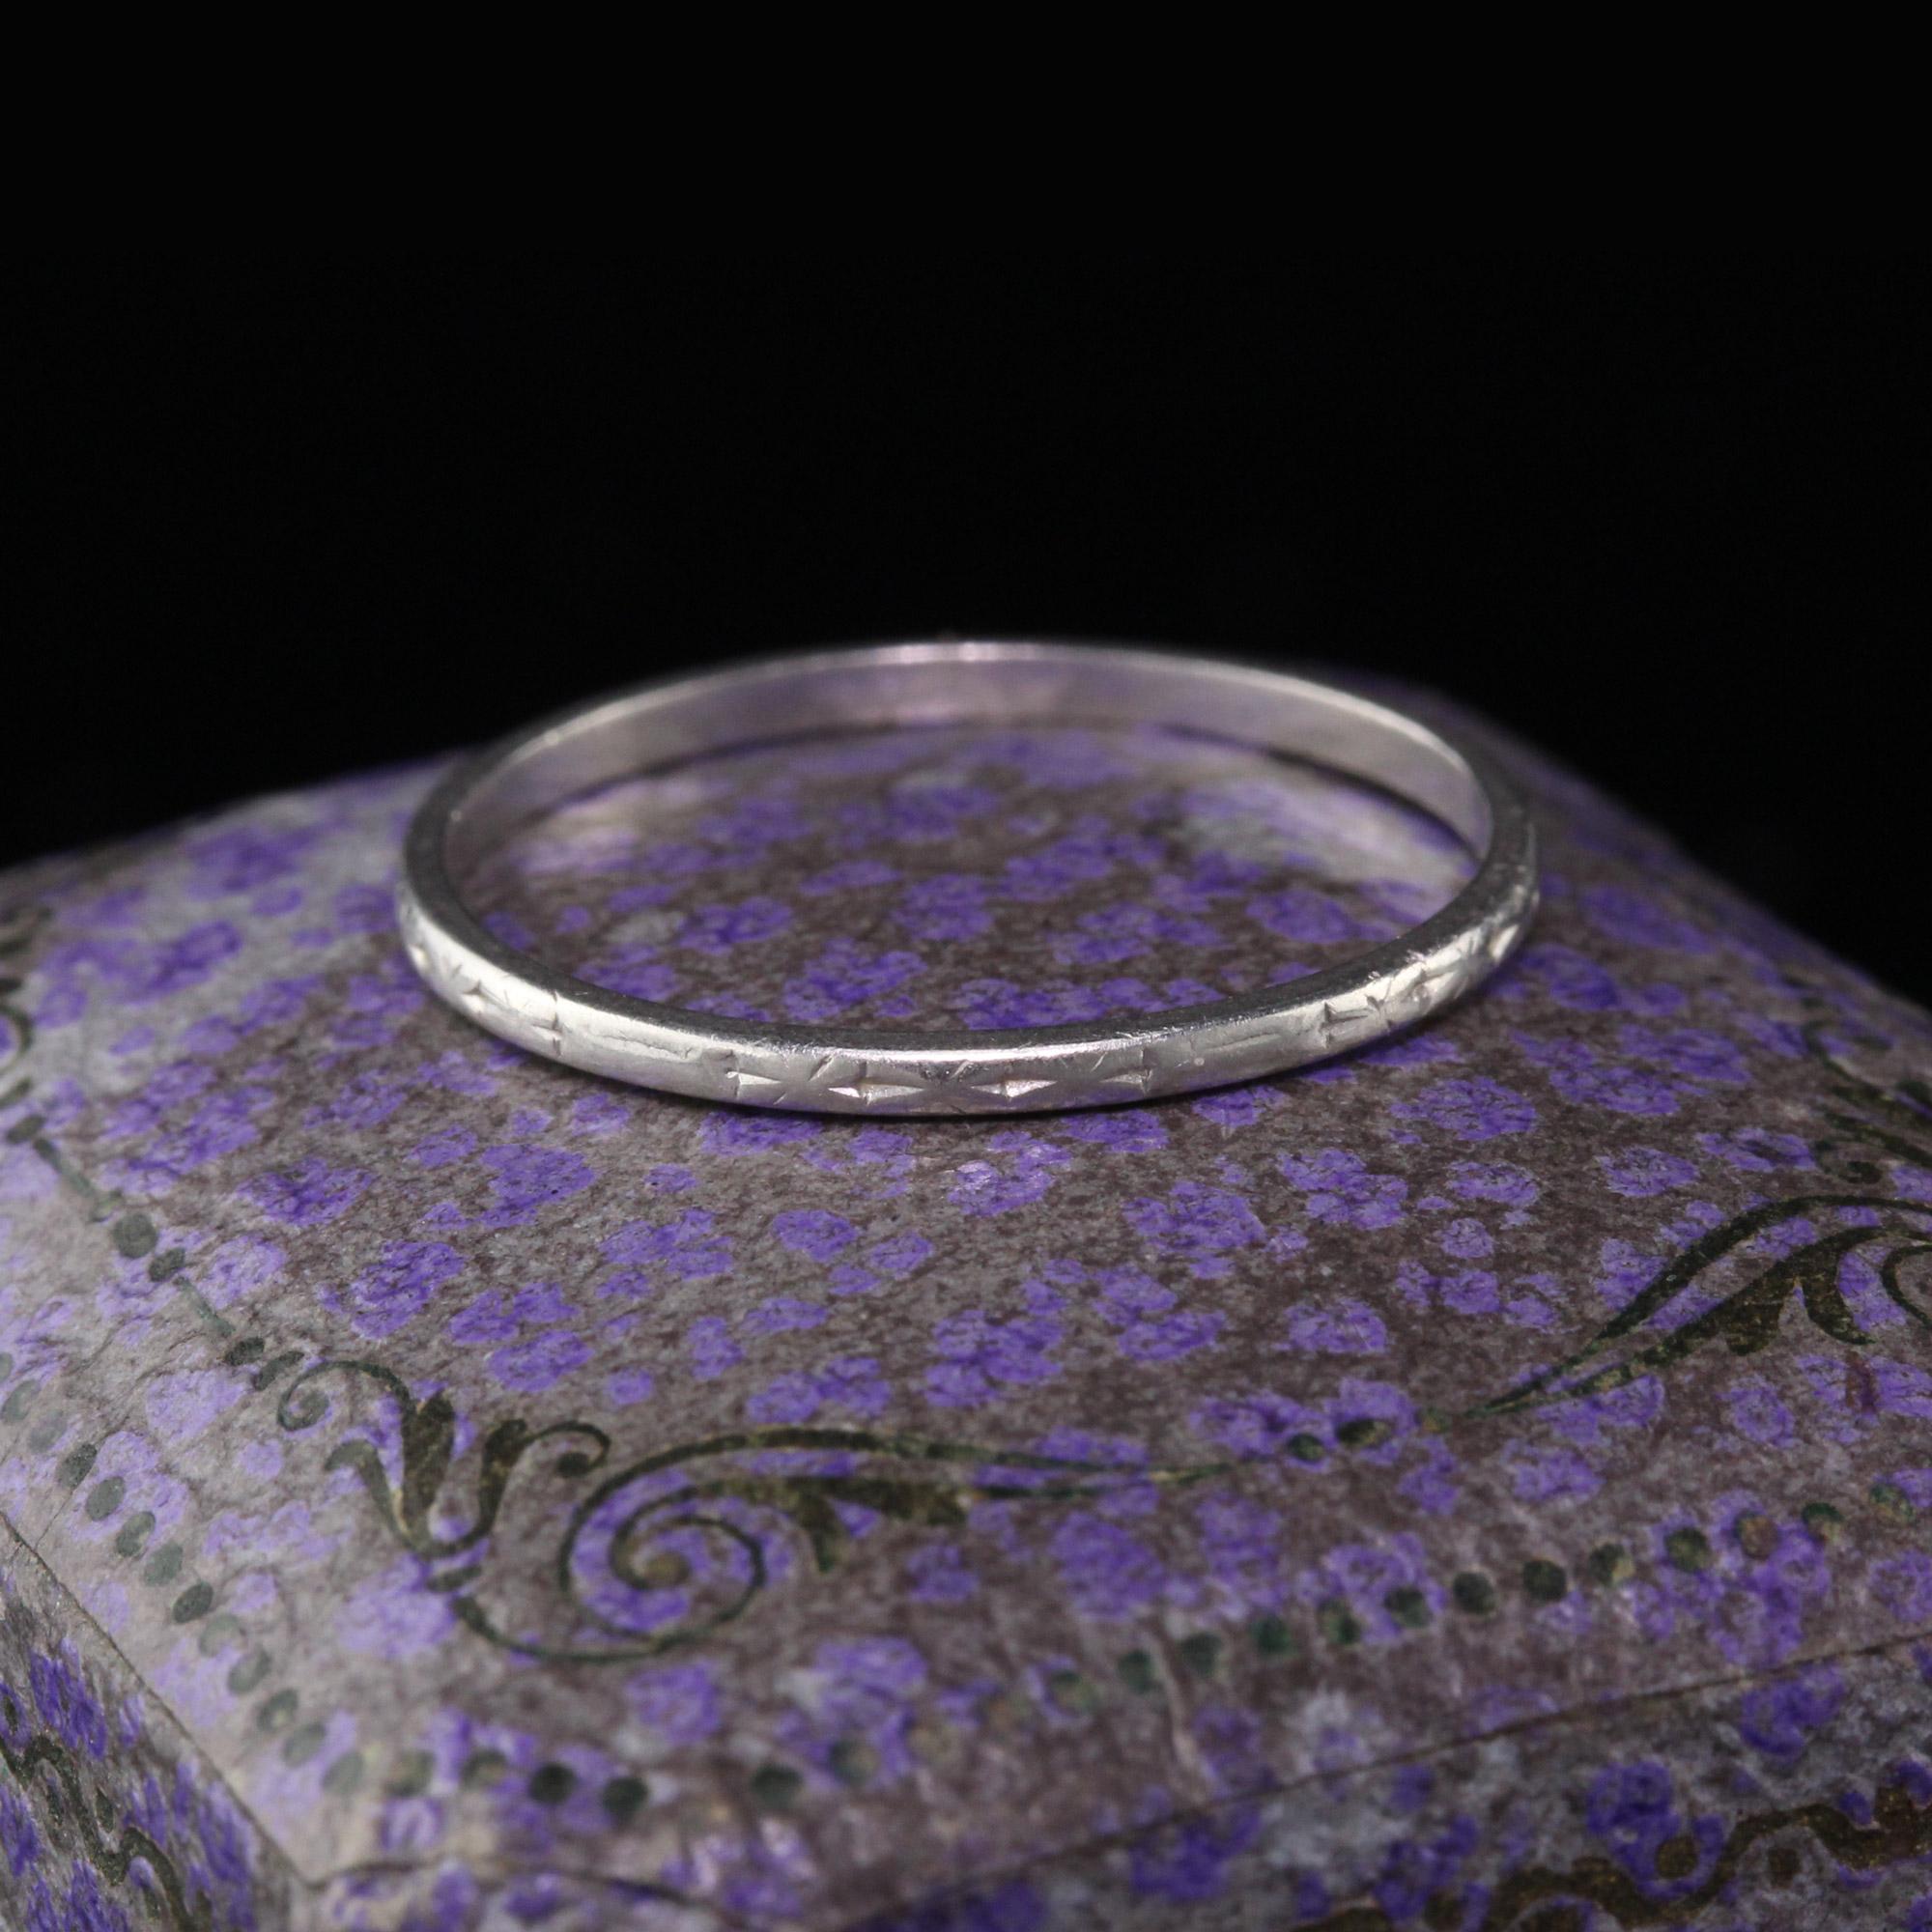 This is a classic Antique Art Deco Platinum Engraved Wedding Band. The band is in good condition. It is very dainty and can be stacked with other rings.

#R0132

Metal: Platinum

Weight: 1.3 Grams

Ring Size: 6 1/2 (sizable)

This ring can be sized